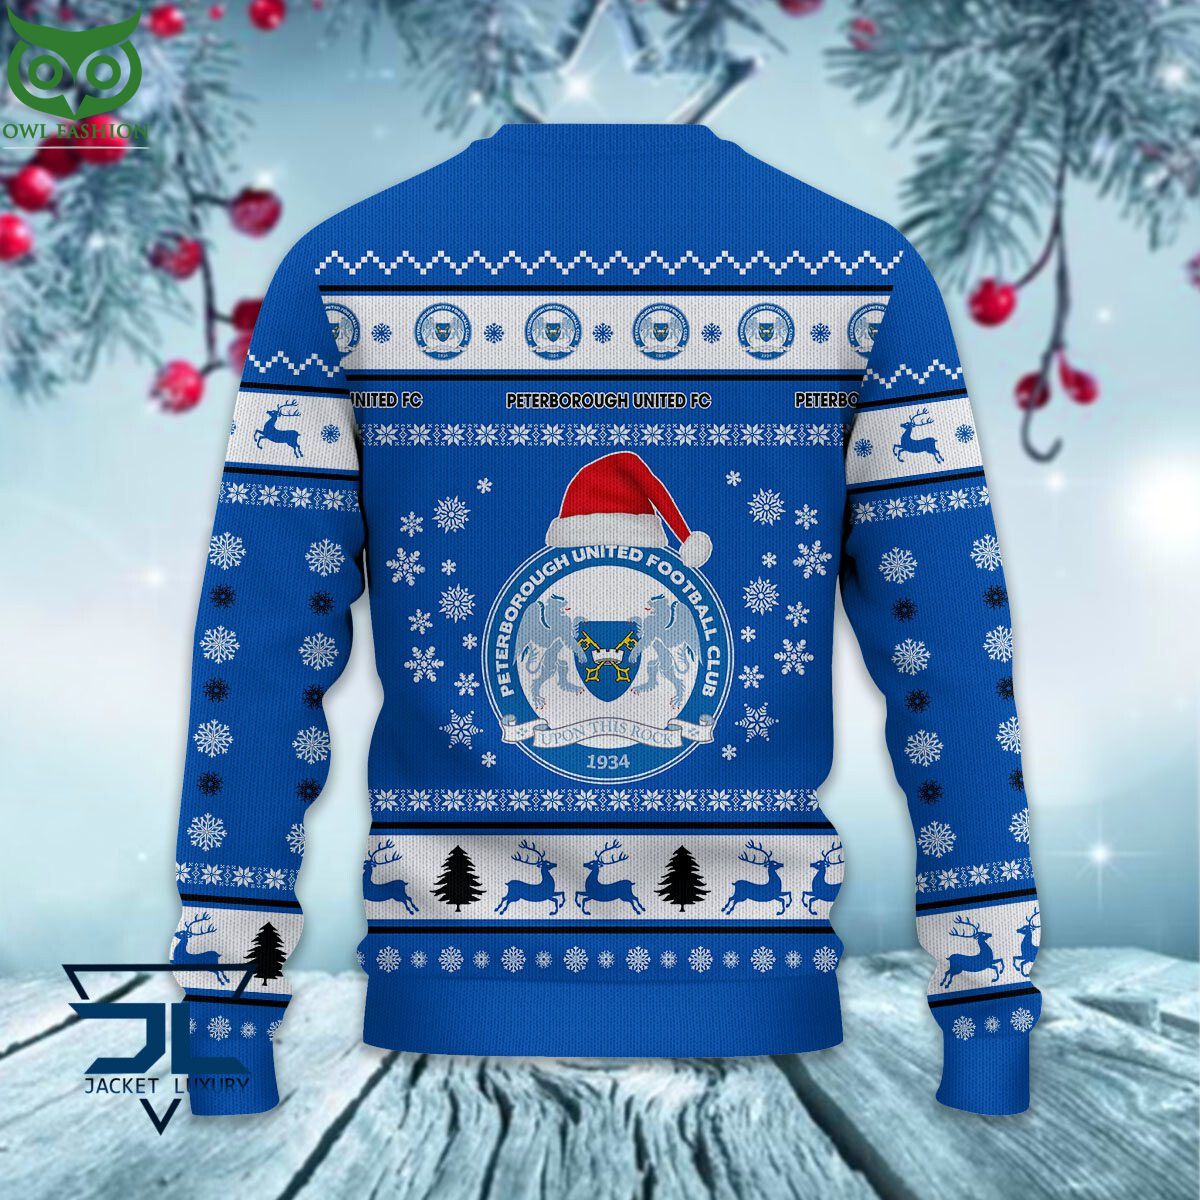 peterborough united f c epl league cup ugly sweater 3 2t8Lr.jpg